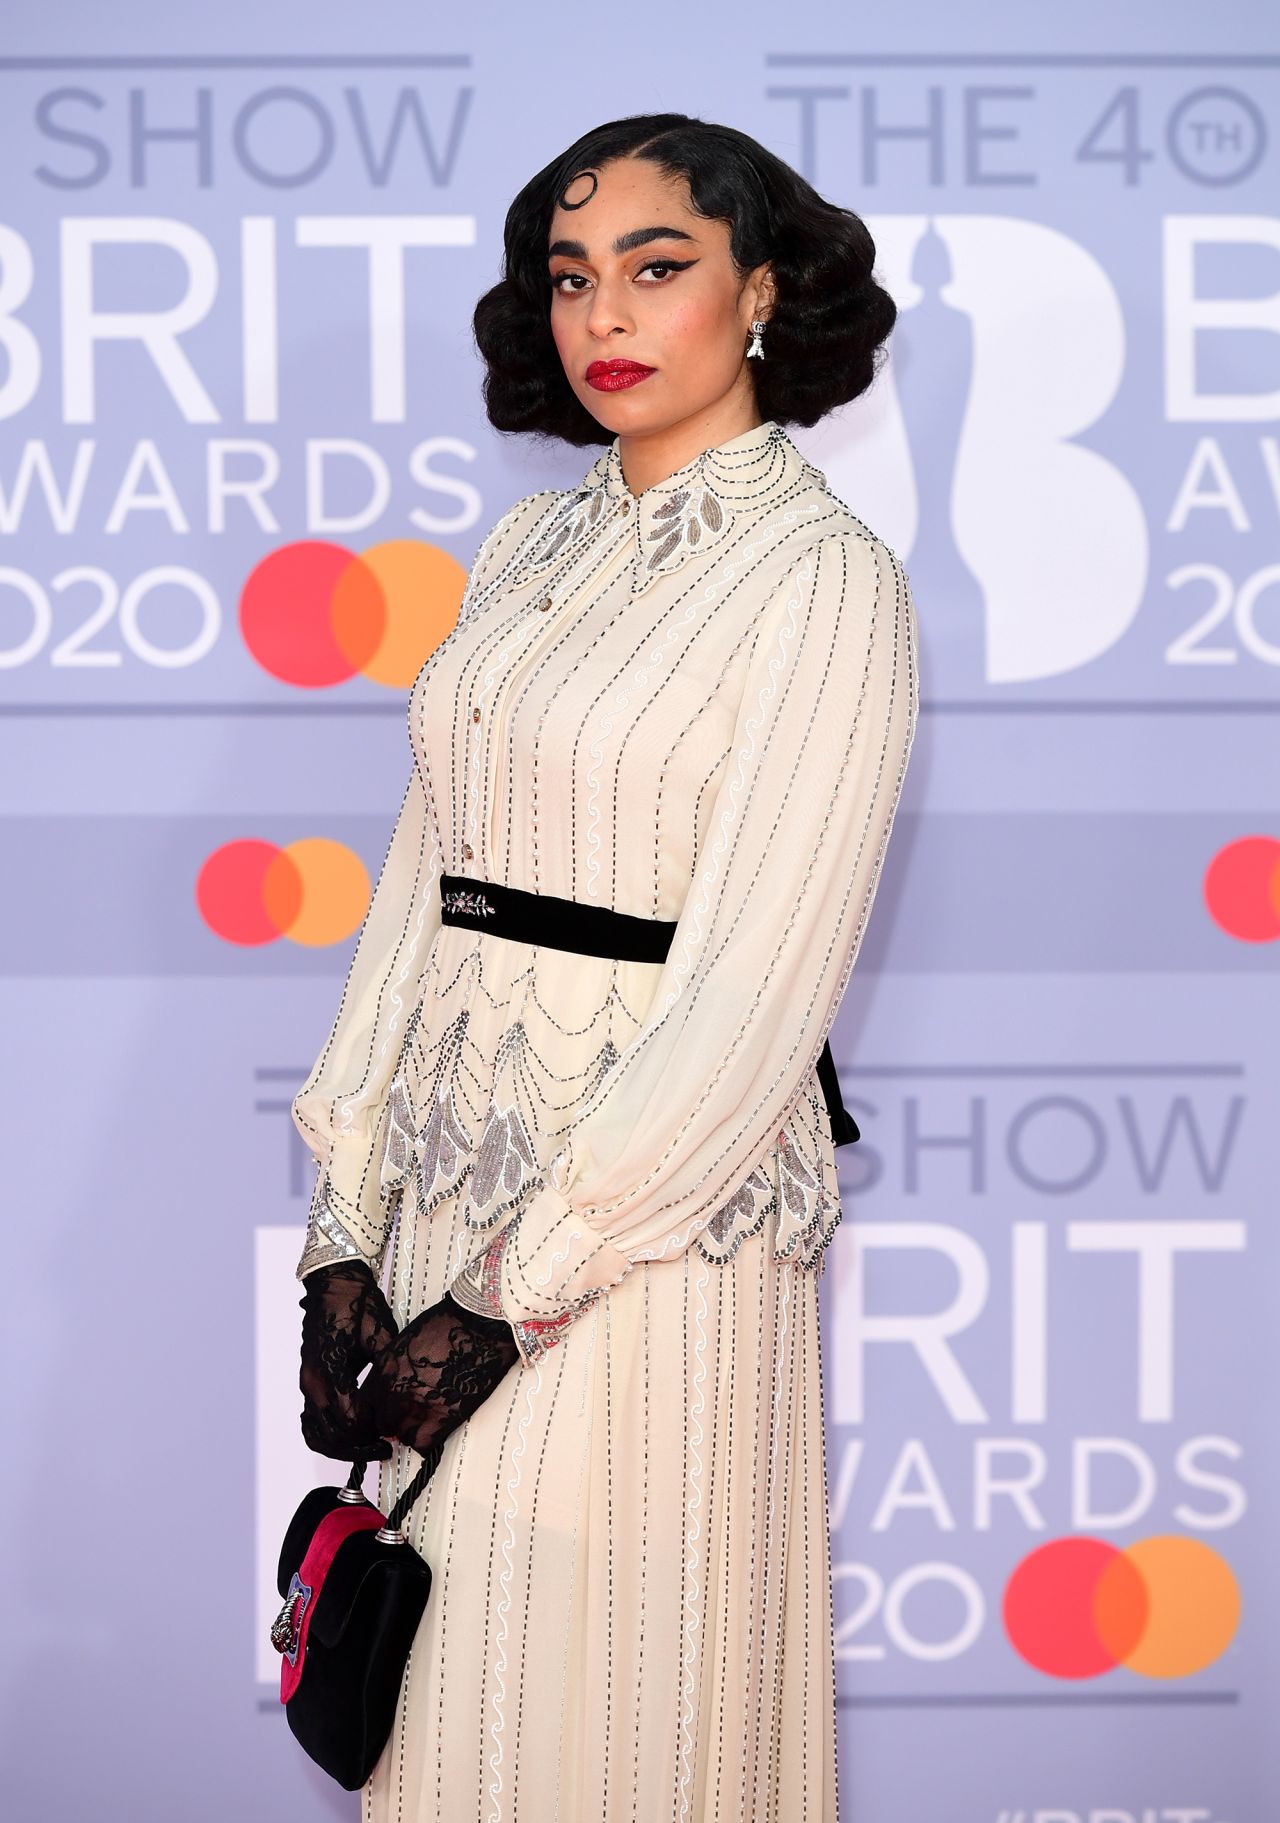 Celeste arriving at The Brit Awards 2020 held at the O2 Arena in London. 